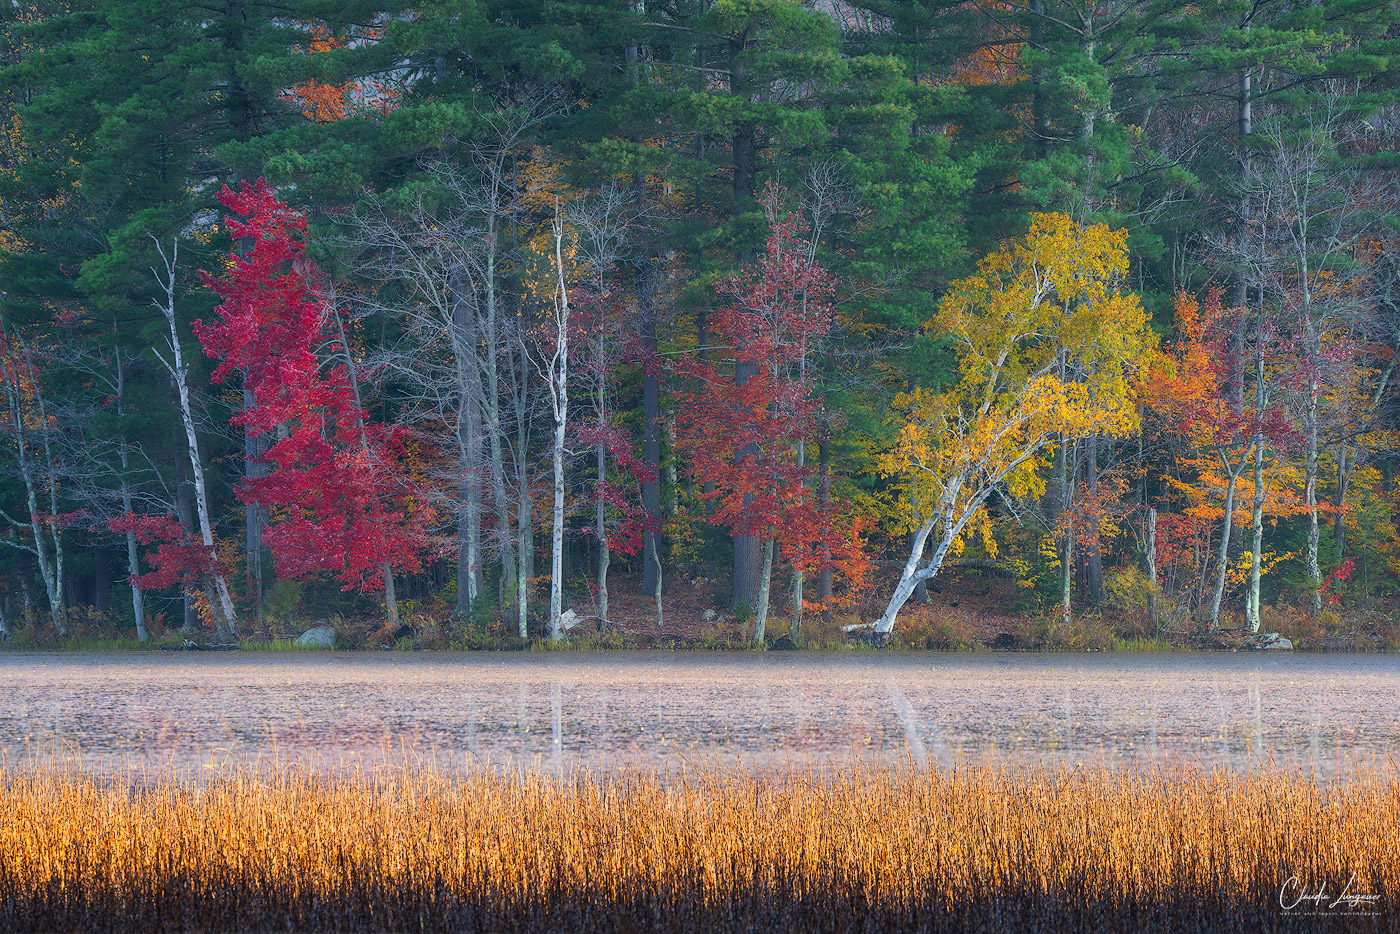 View of colorful trees at Leffert's Pond in Vermont during fall season.